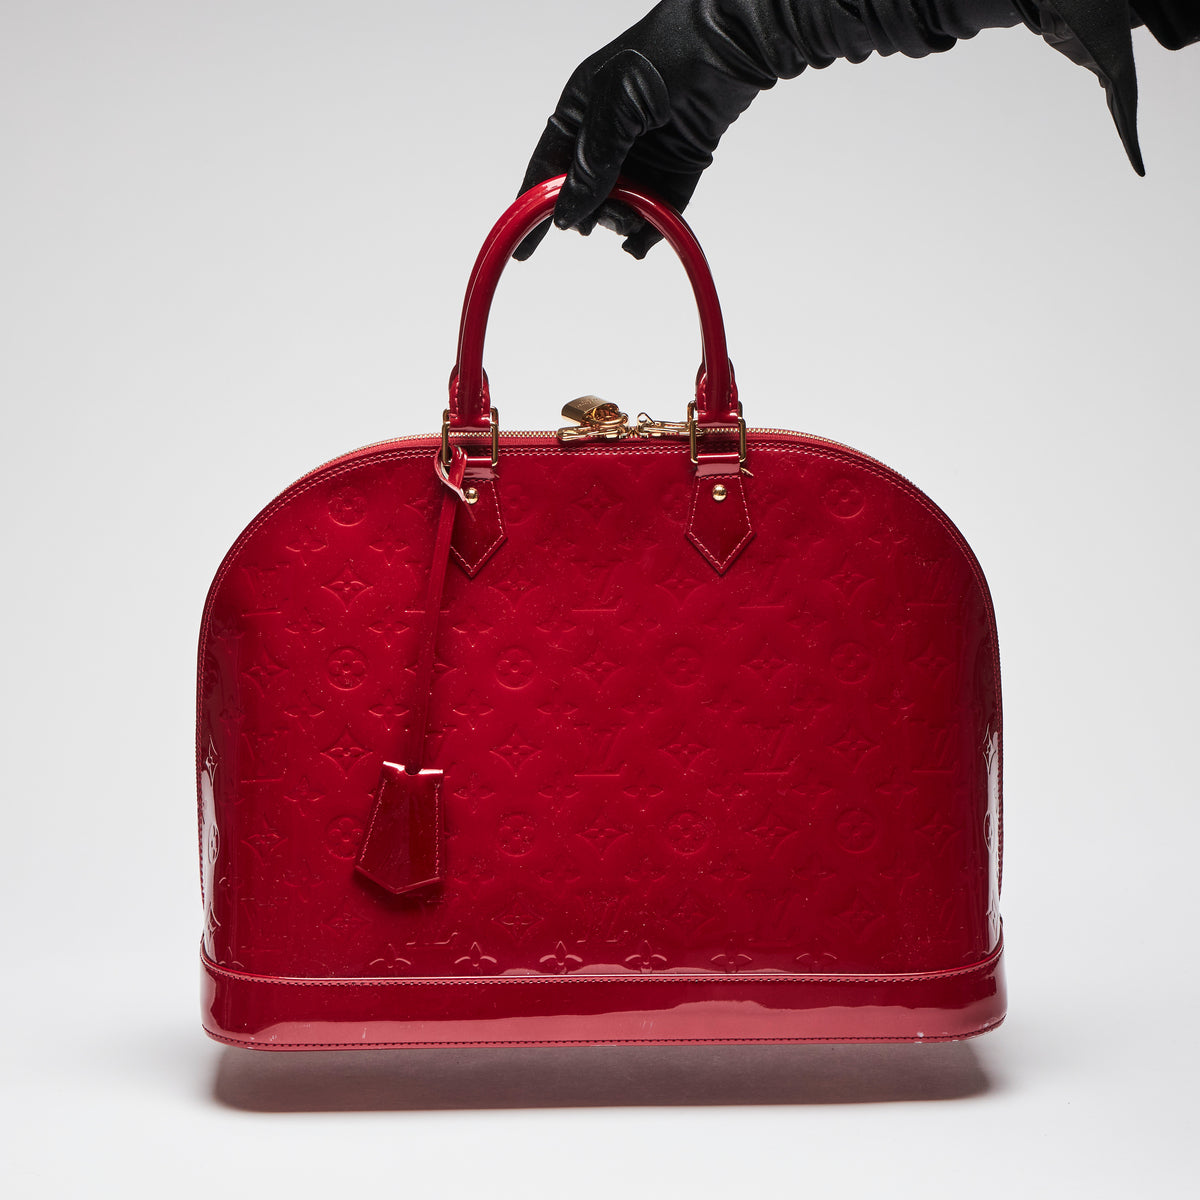 Pre-Loved Large Monogram Embossed Red Patent Leather Half Dome Shaped Top Handle Bag. (back)